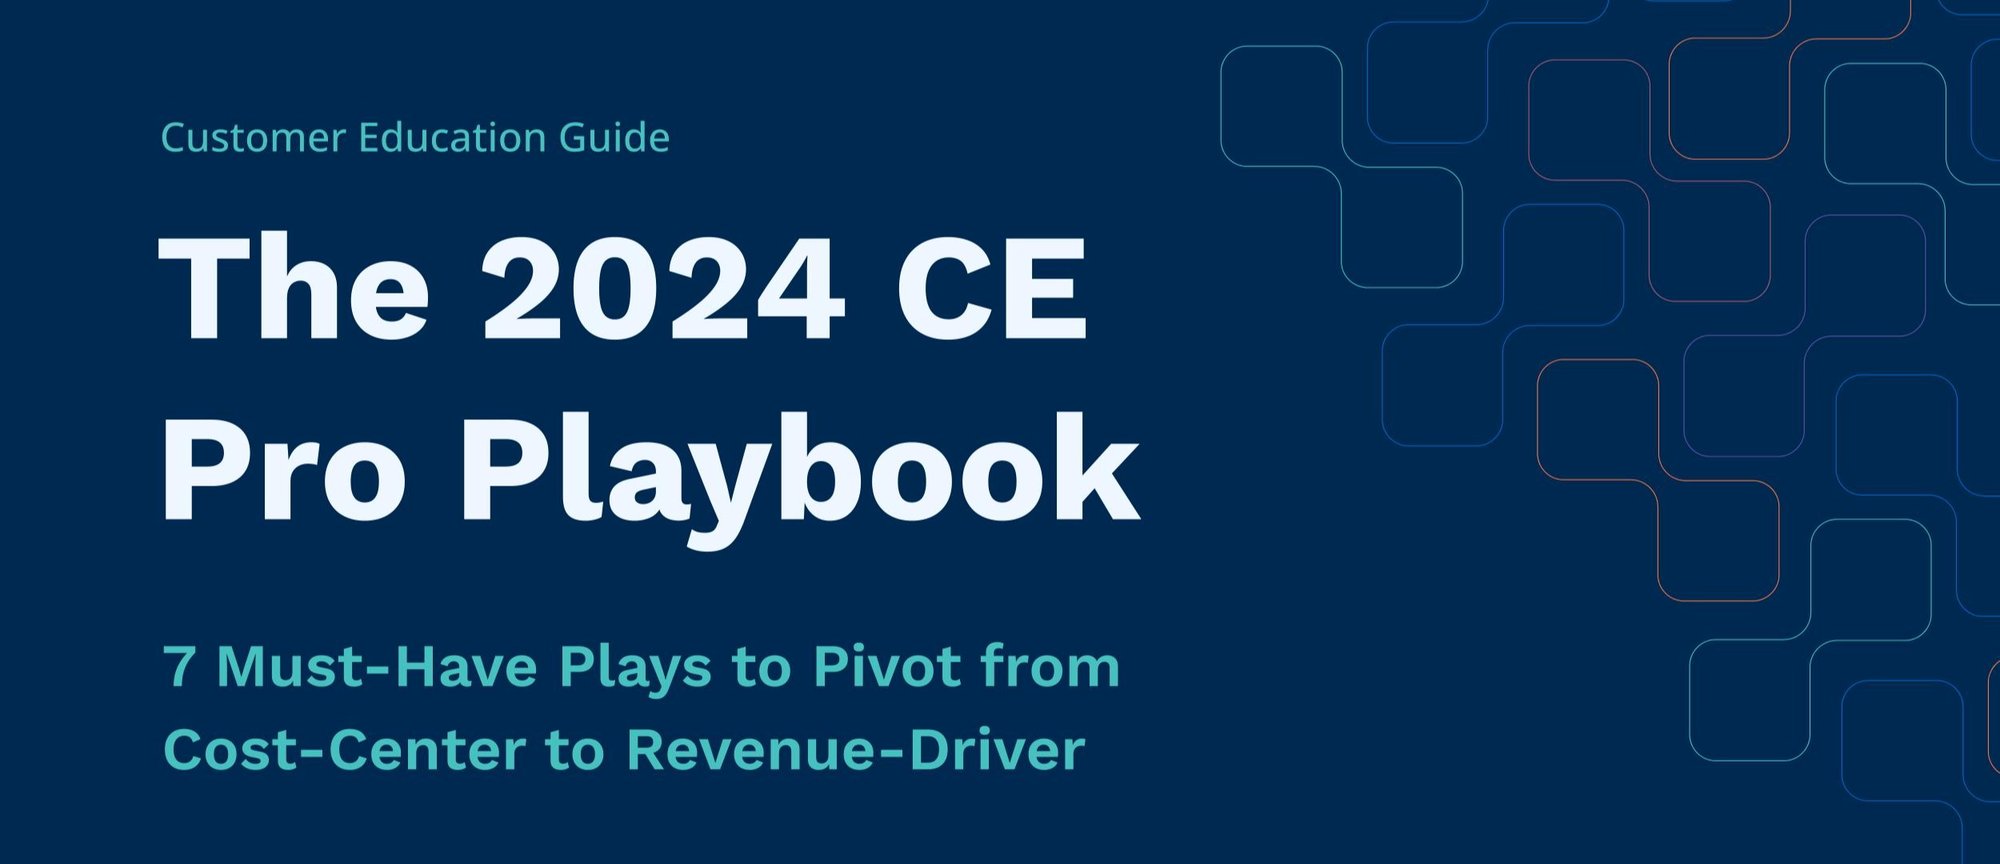 The 2024 CE Pro Playbook—7 Plays to Pivot from Cost-Center to Revenue Driver—Skilljar